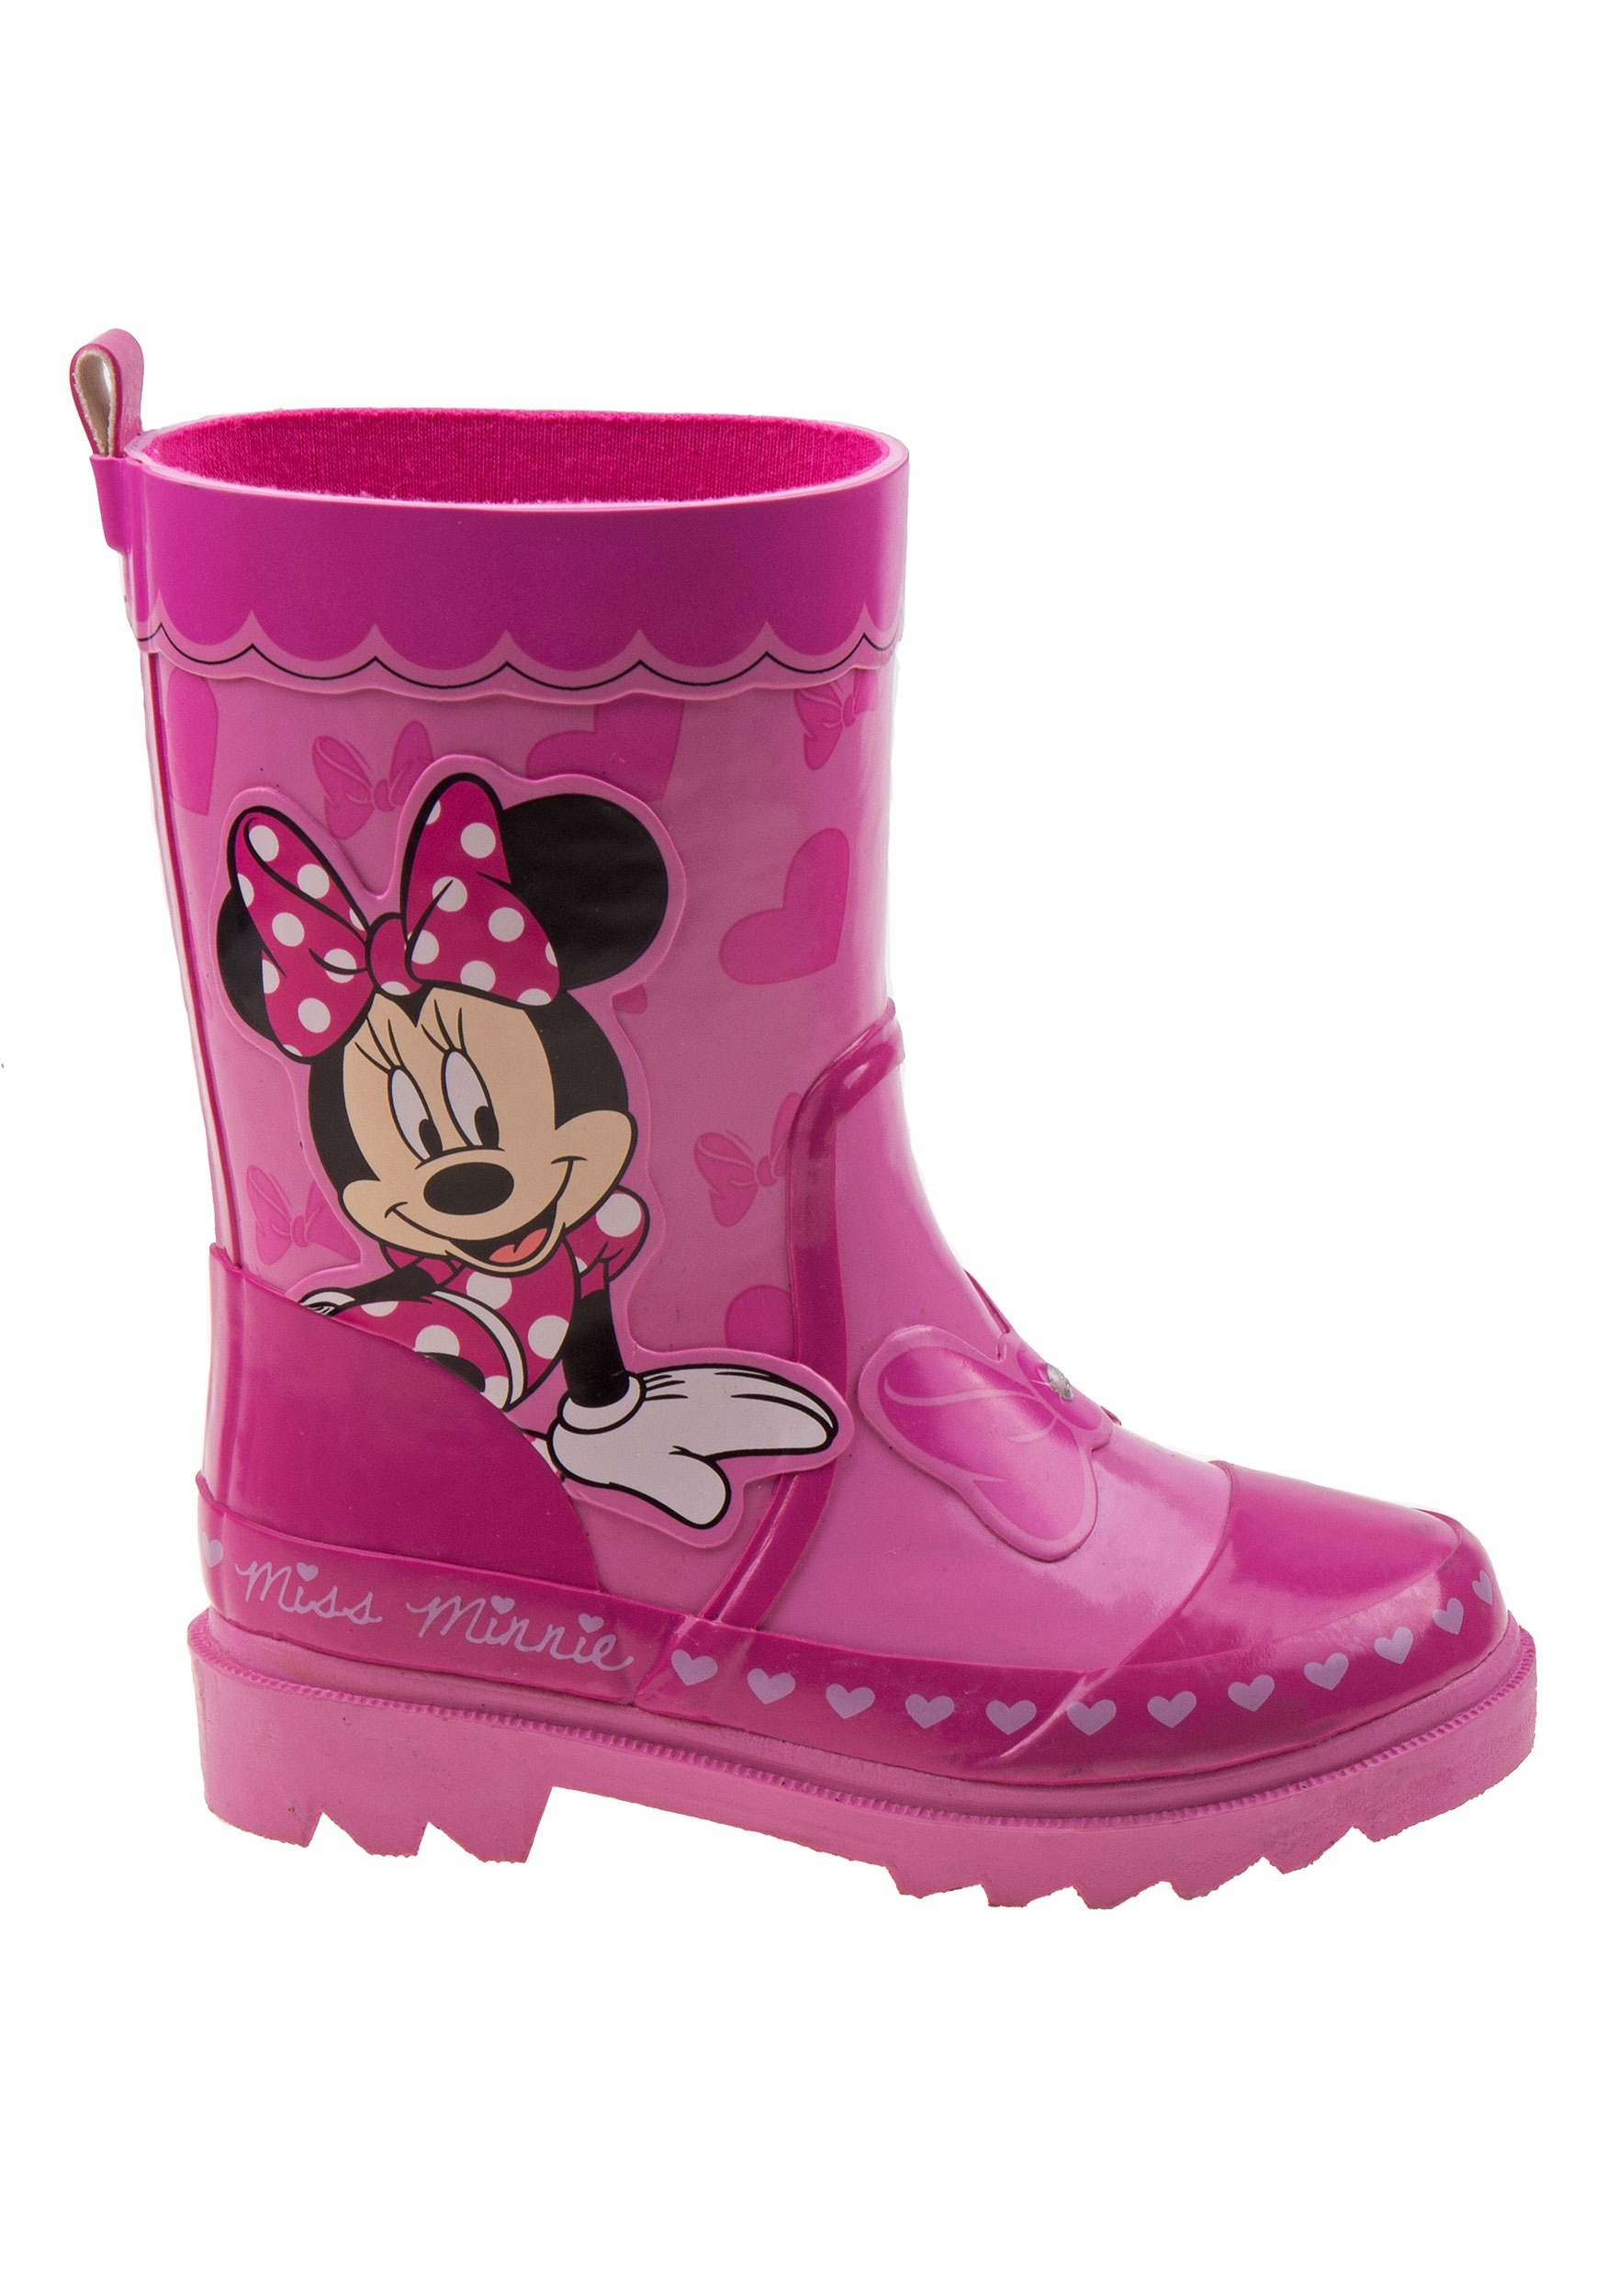 Minnie Mouse Pink Girl's Rain Boots